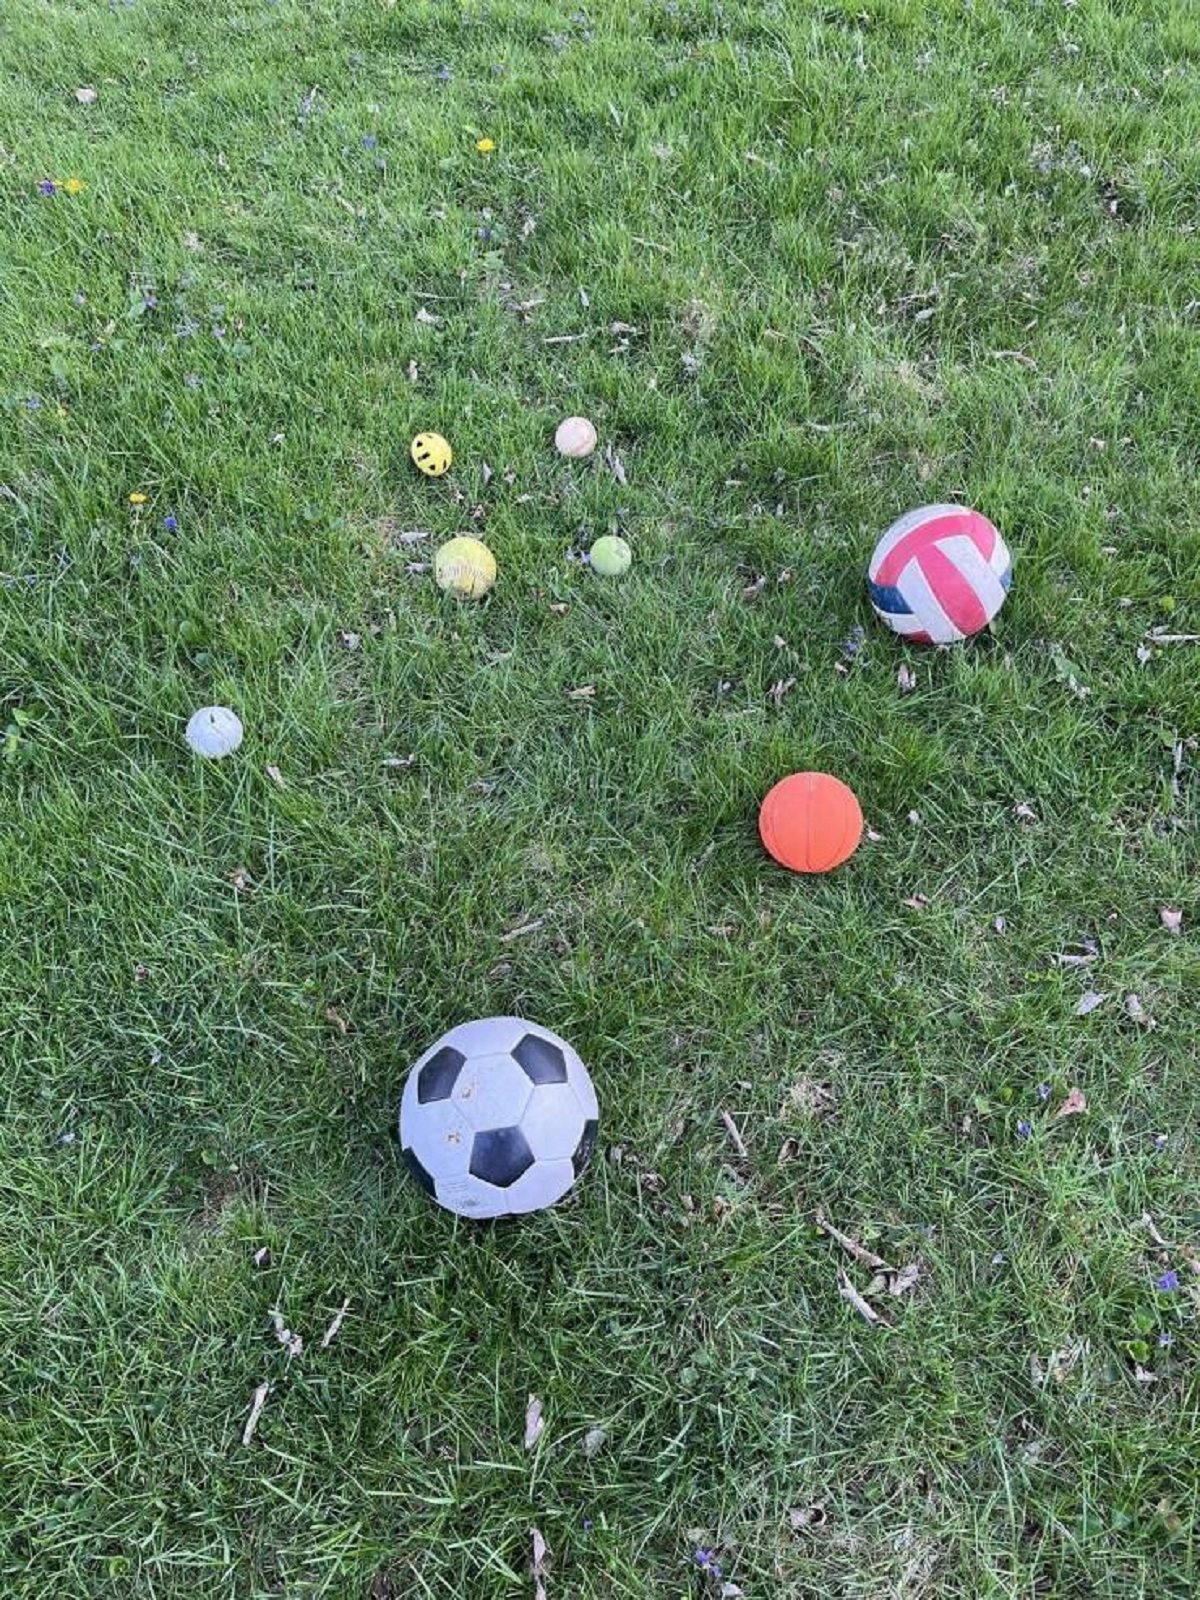 "The balls have accumulated in my backyard over the last year from over the fence."